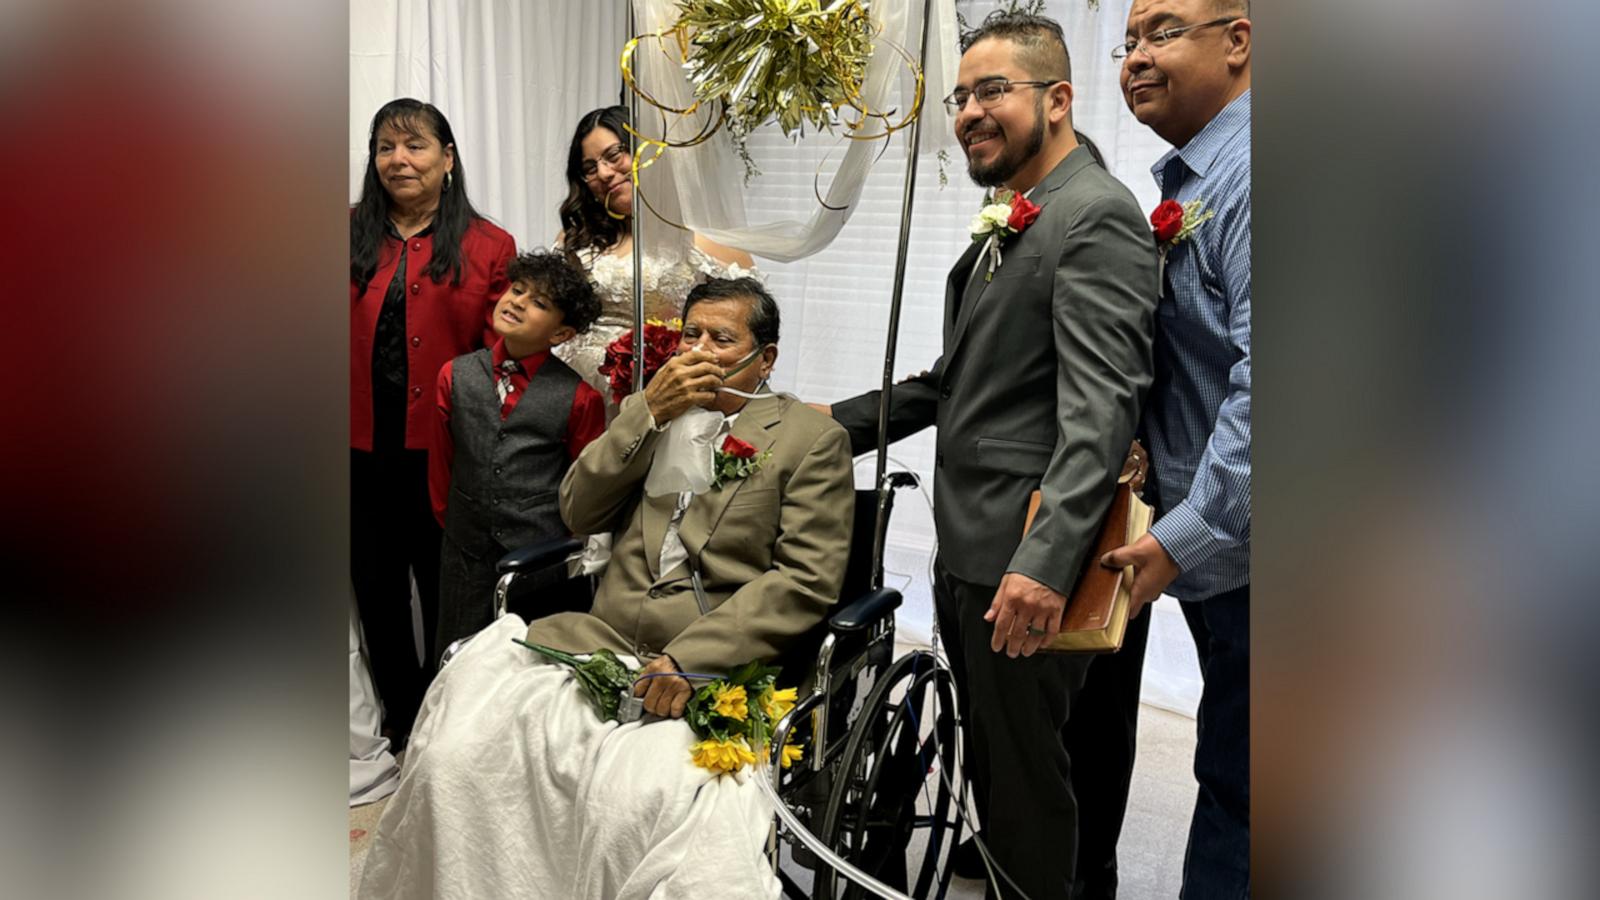 VIDEO: Hospital hosts surprise wedding to fulfill patient's last wish